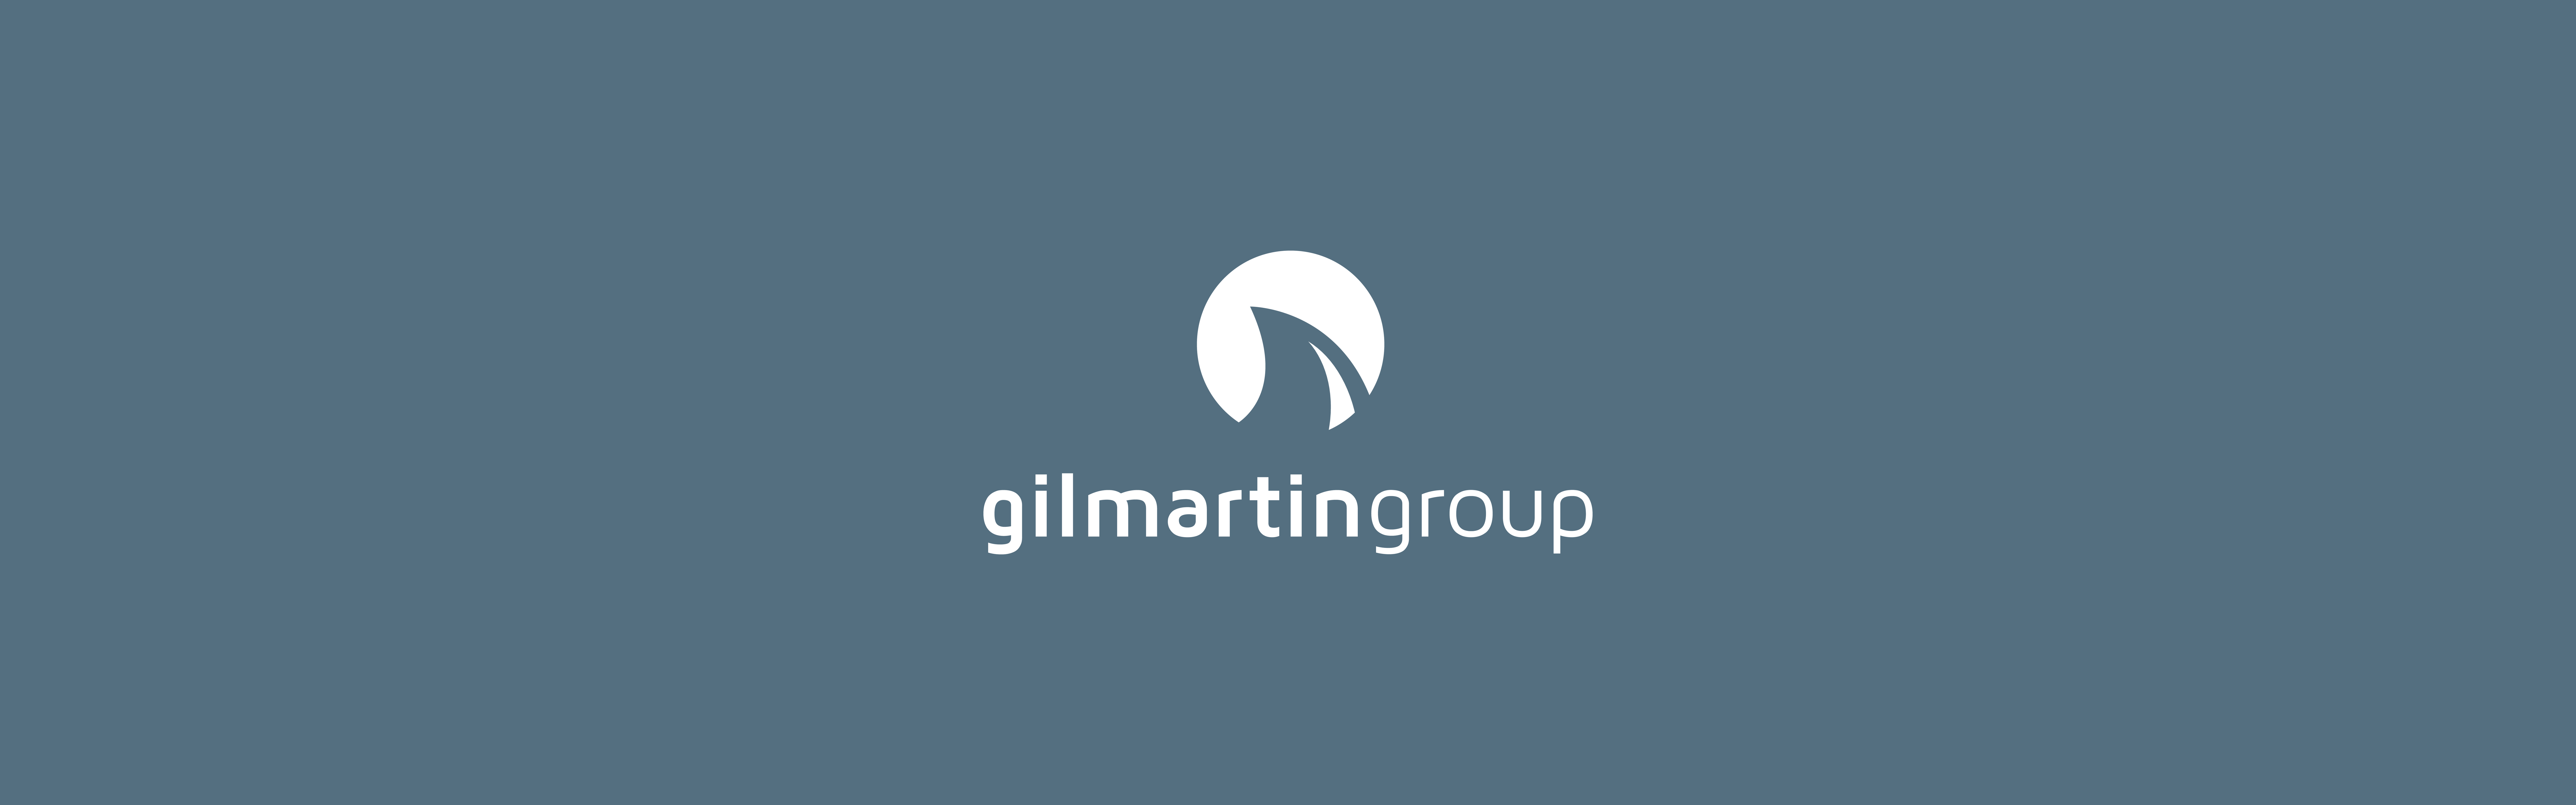 Logo of the Gilmartin Group on a gray background.